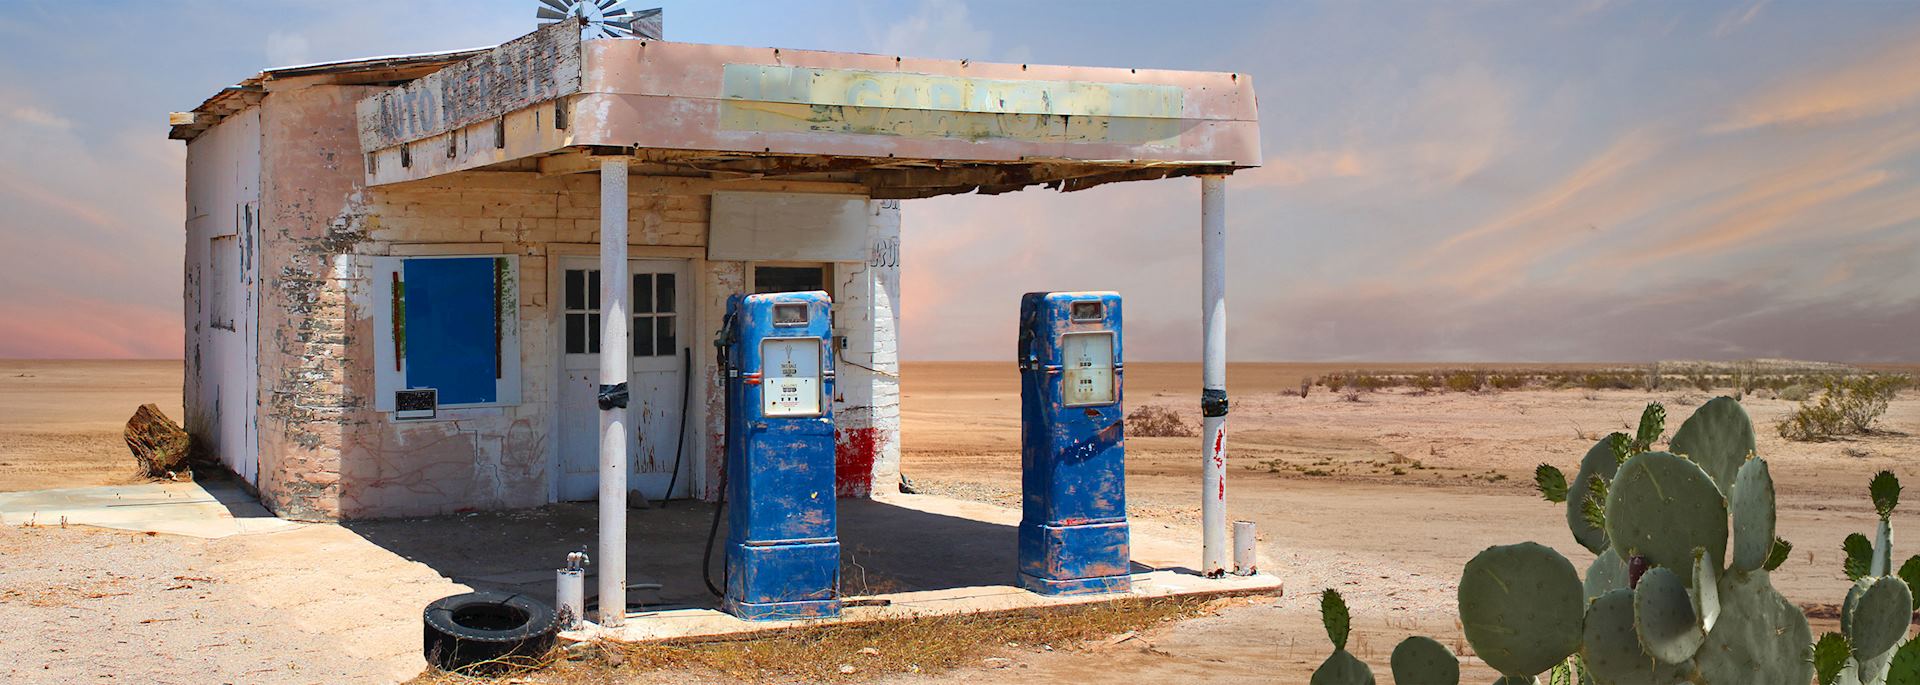 Gas station on Route 66